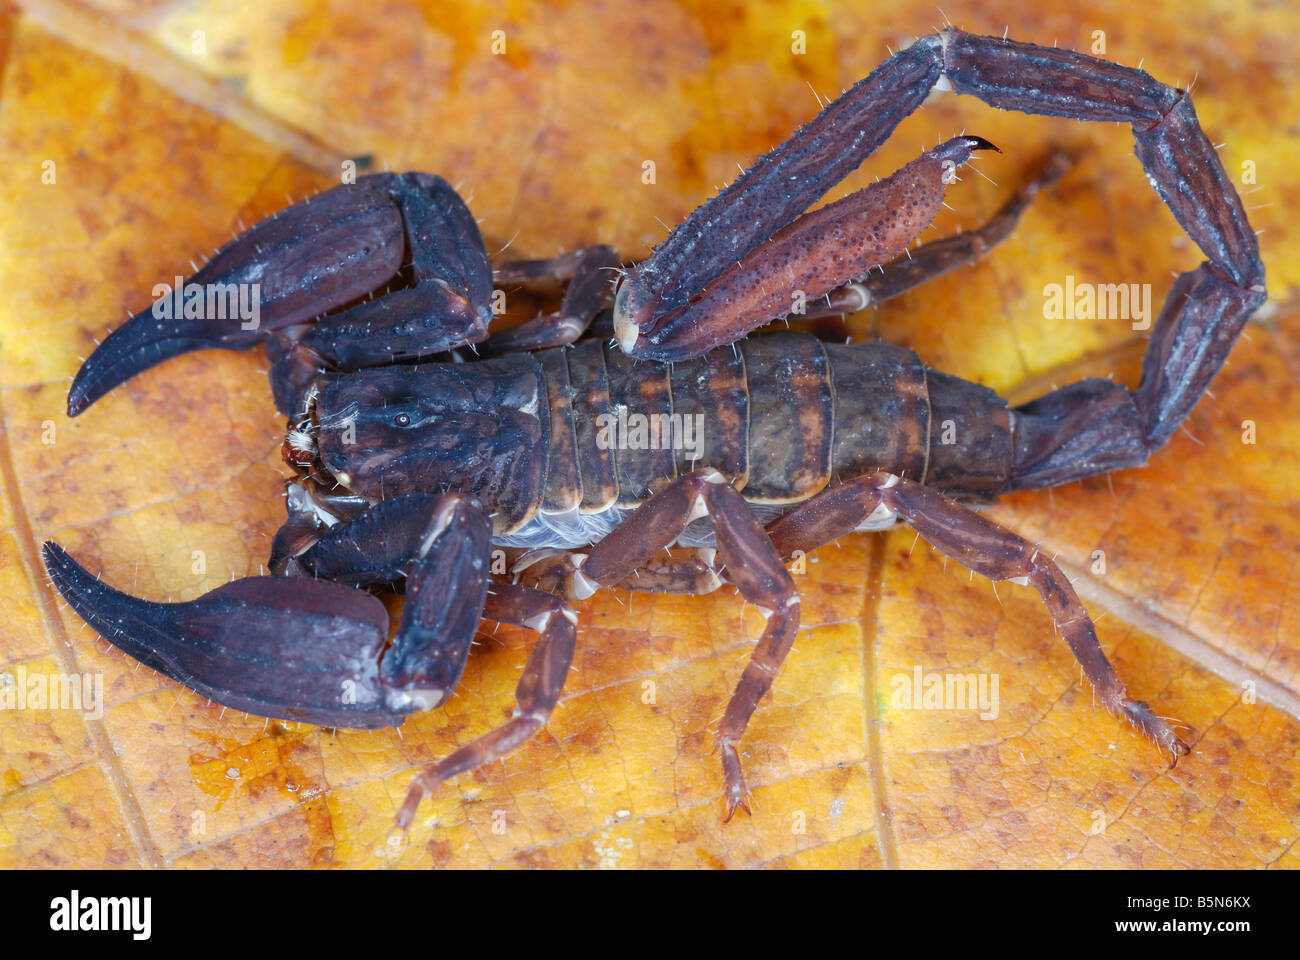 Chaerilus pictus  Family : CHAERILIDAE . An extremely RARE species of scorpion. Restricted to the trans himalayan forests. Stock Photo